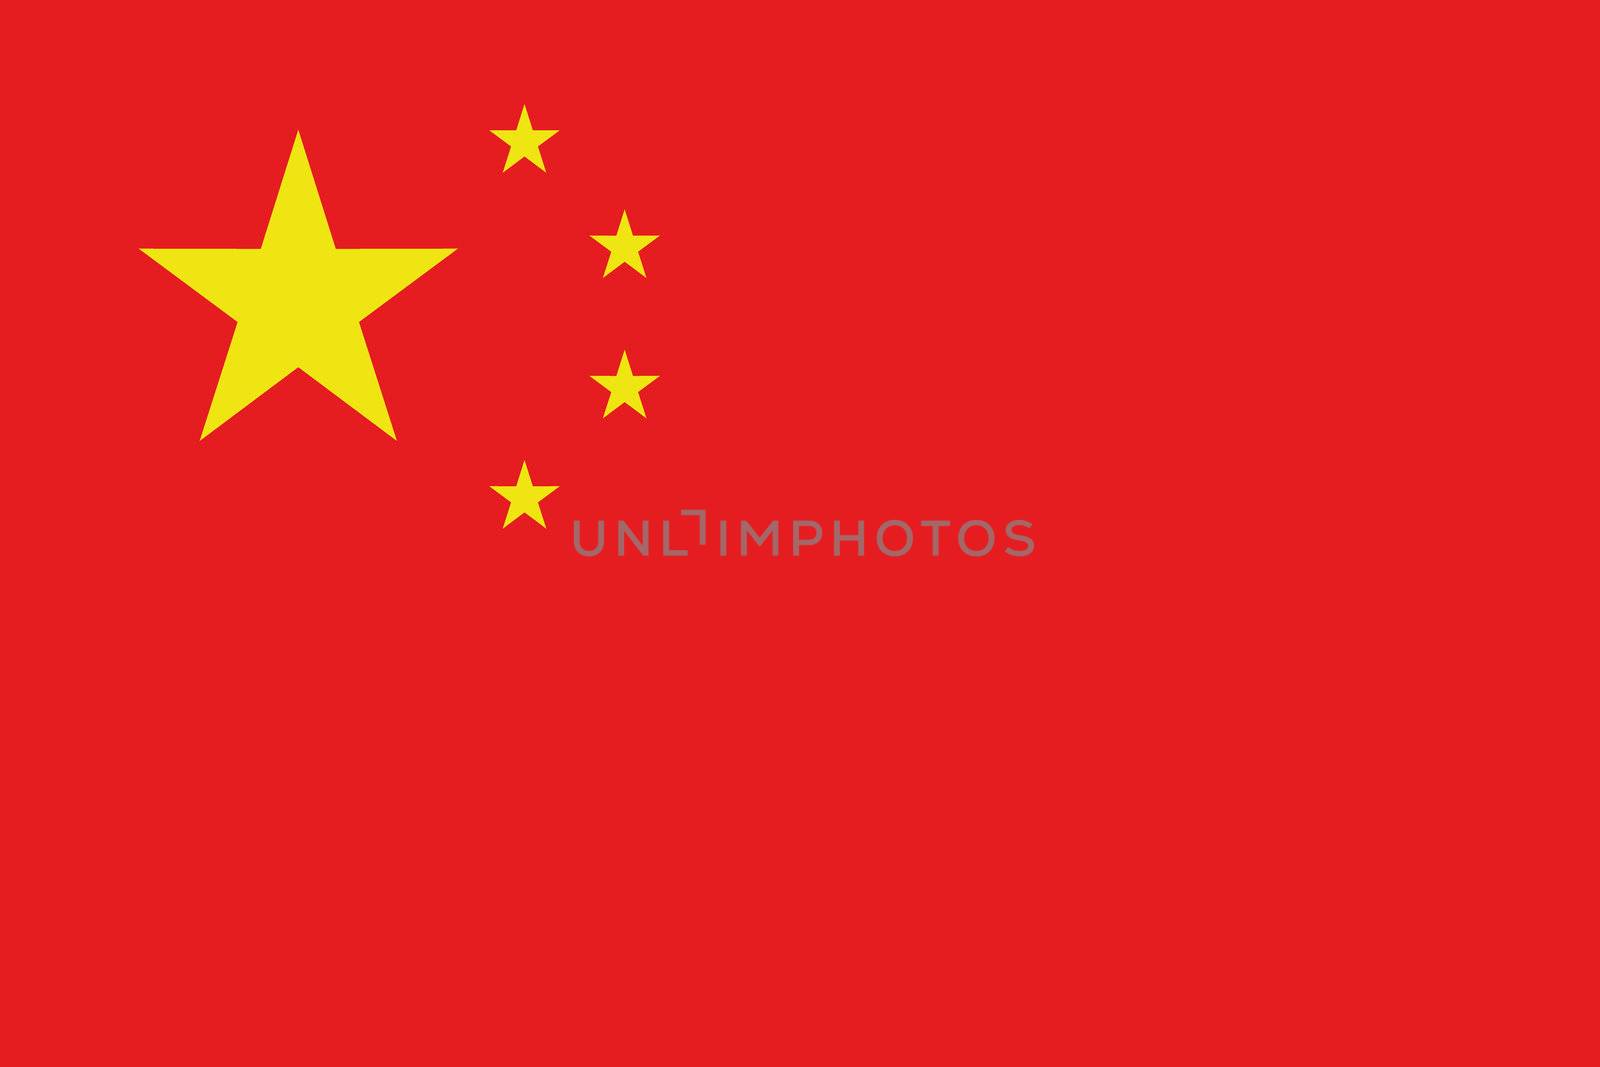 An illustration of the flag of China